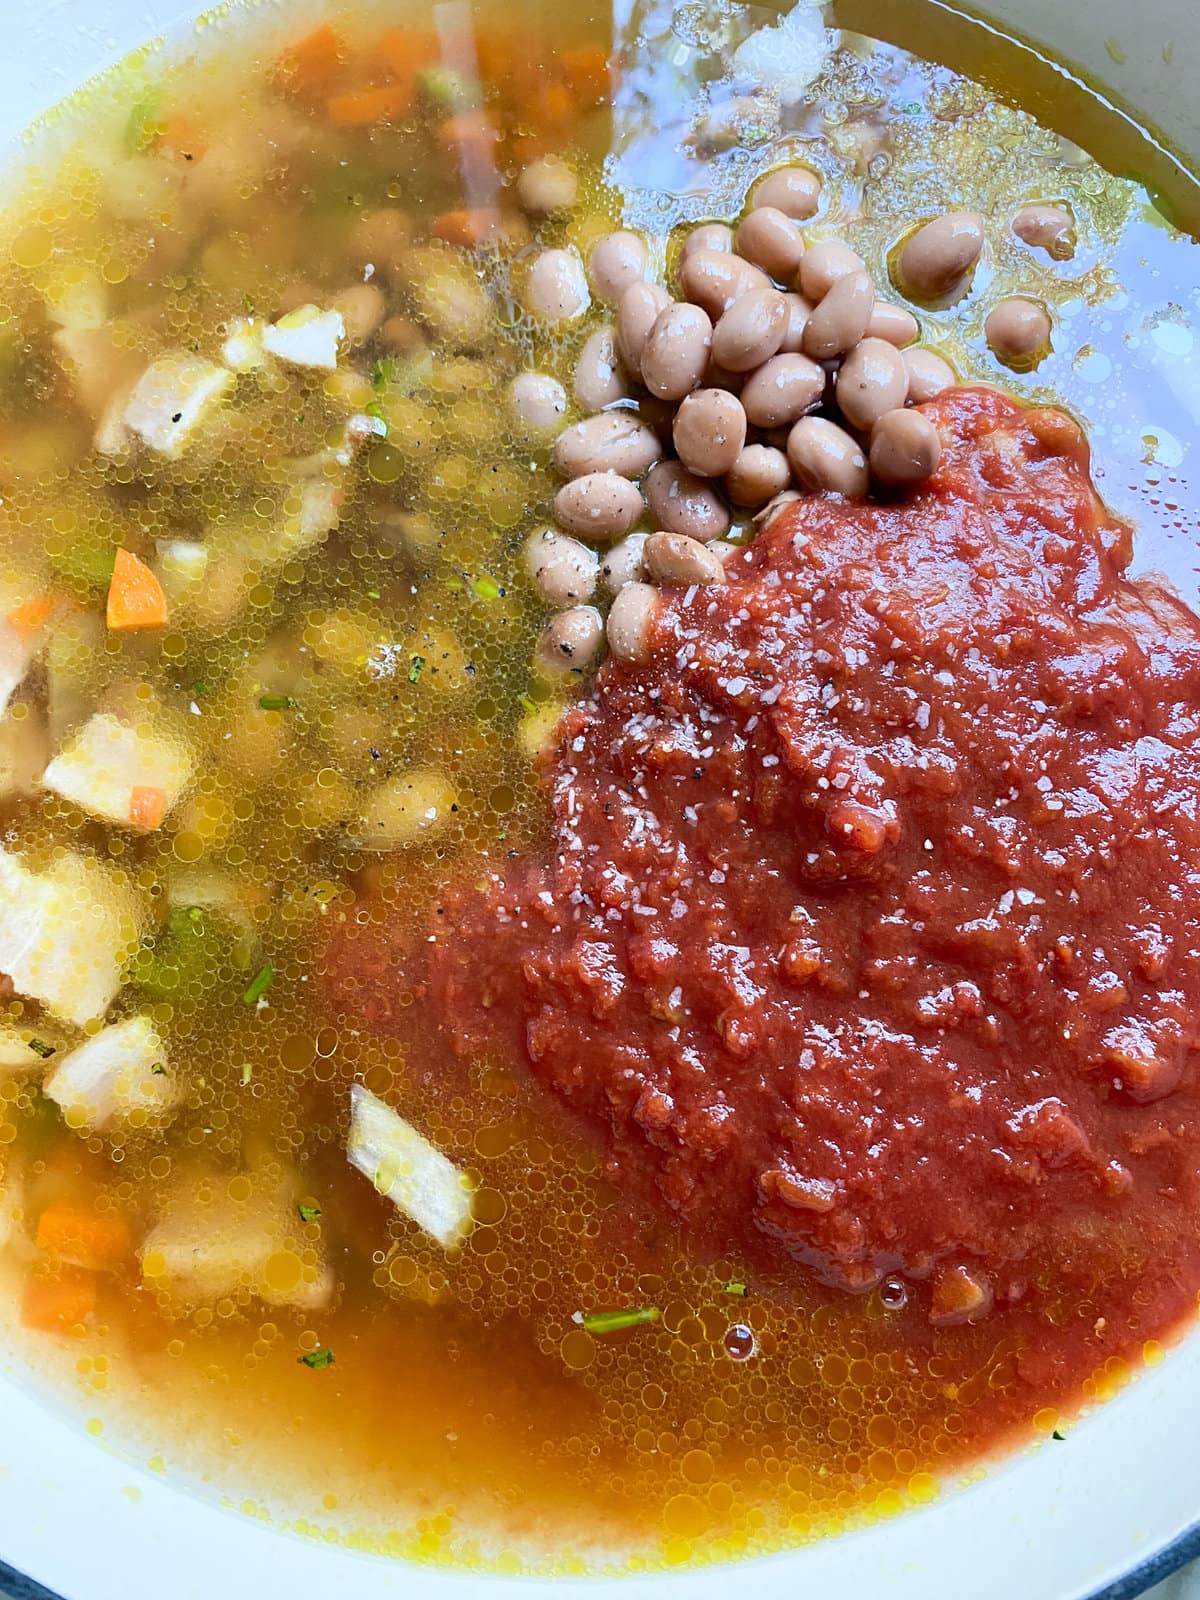 How to make: add half of beans and crushed tomates